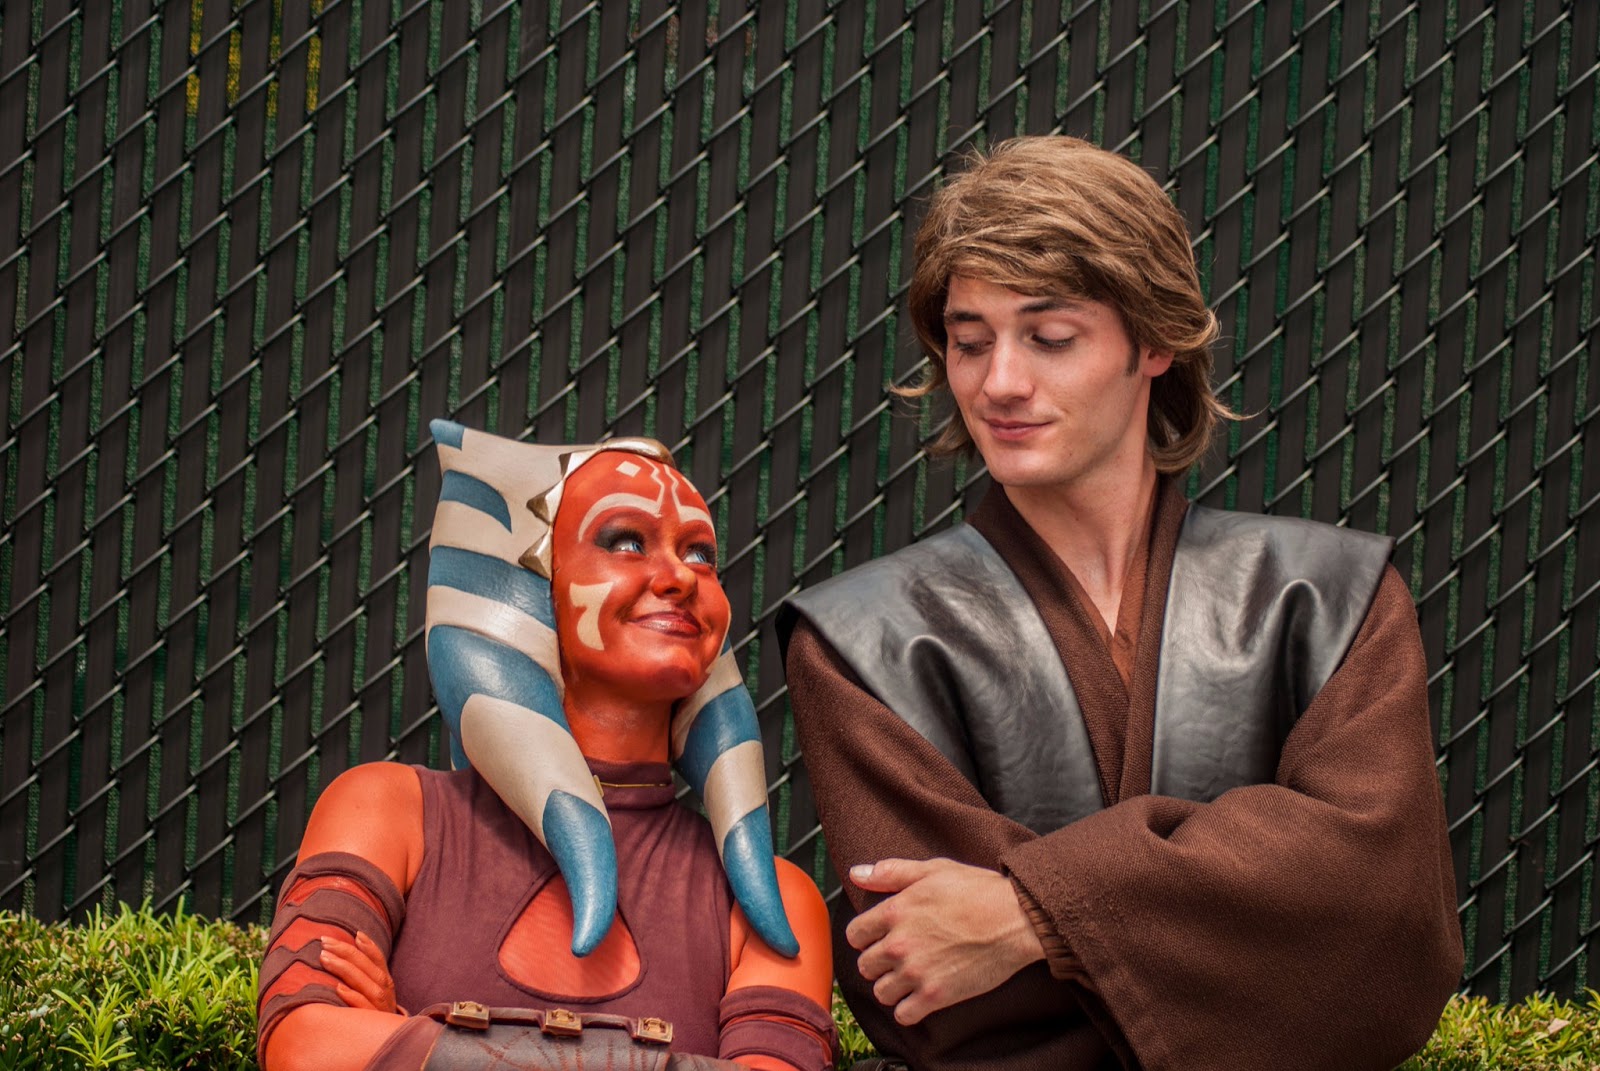 cover member Prospect Snips and Anakin chillin' make a very sweet cosplay duo | Wealth of Geeks